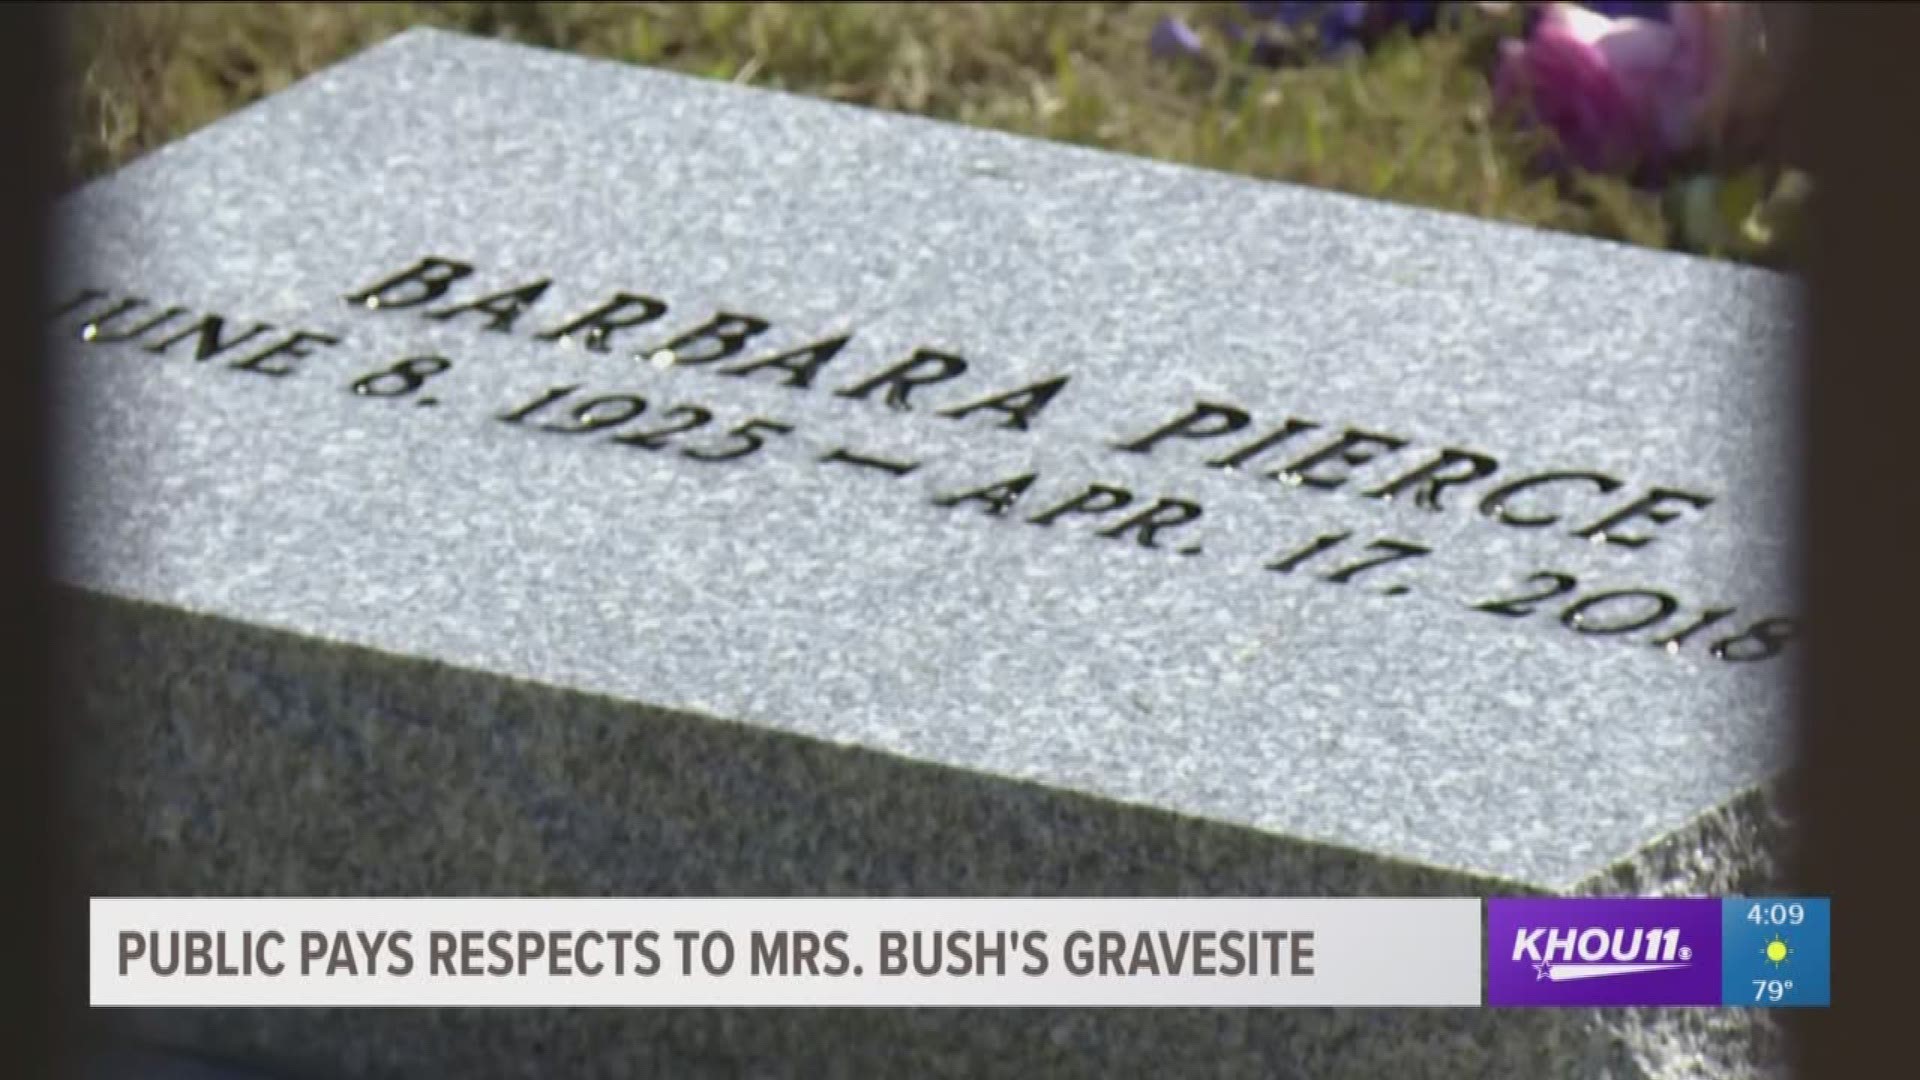 The gravesite of former First Lady Barbara Bush in College Station opened to the public Monday morning.